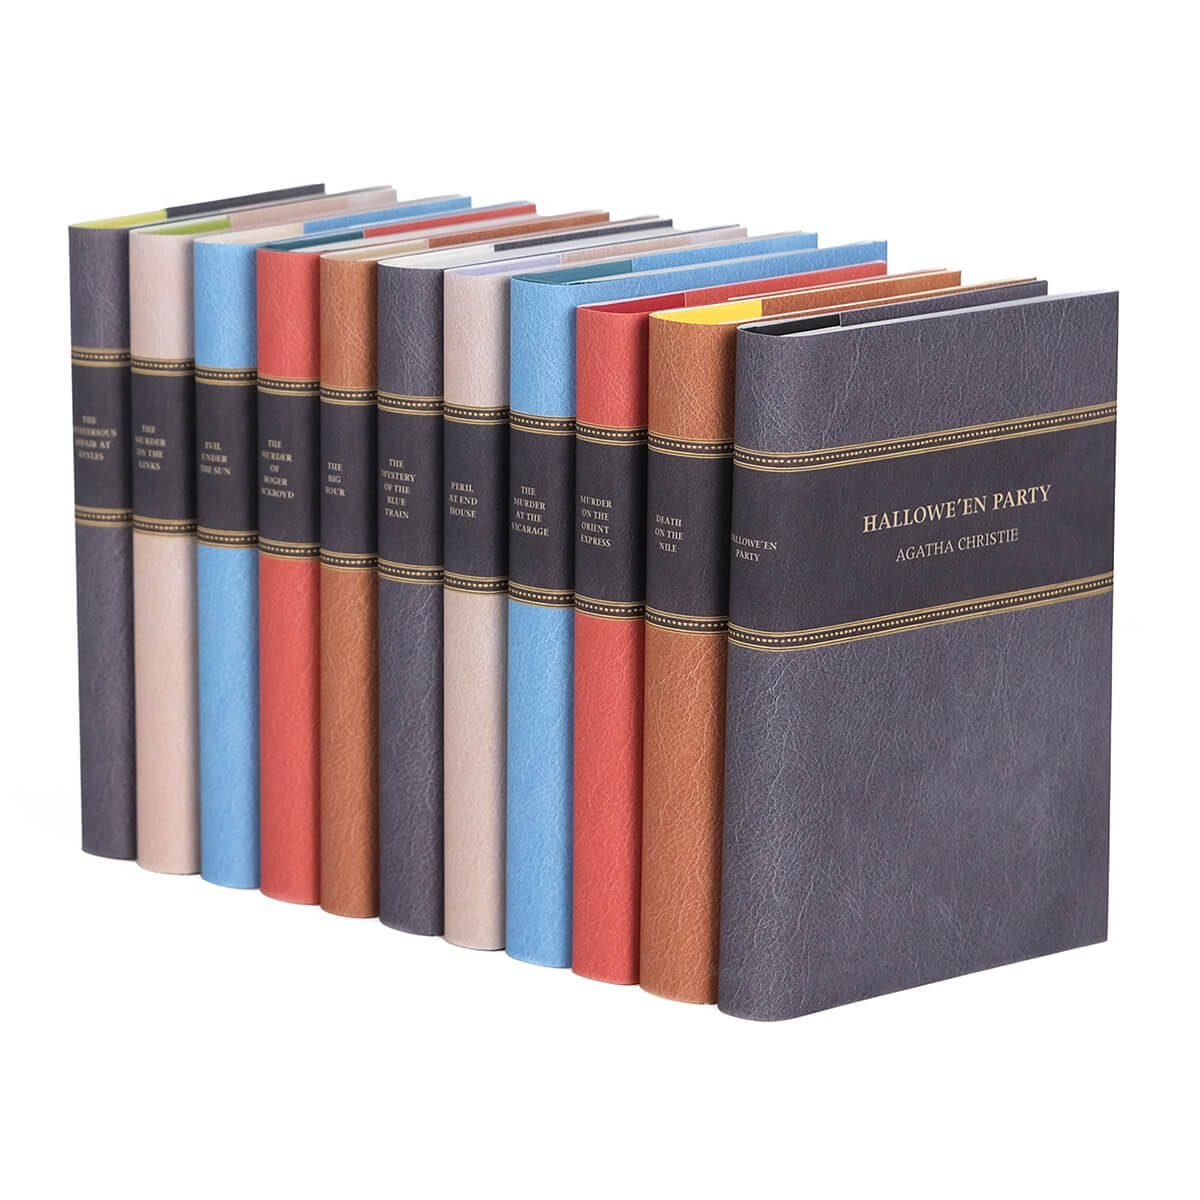 Agatha Christie books wrapped in custom collectible faux leather dust jackets  in black, beige, blue, red, light brown from Juniper Custom. Dust jacket covers feature book title and author name in gold color san serif set against black.